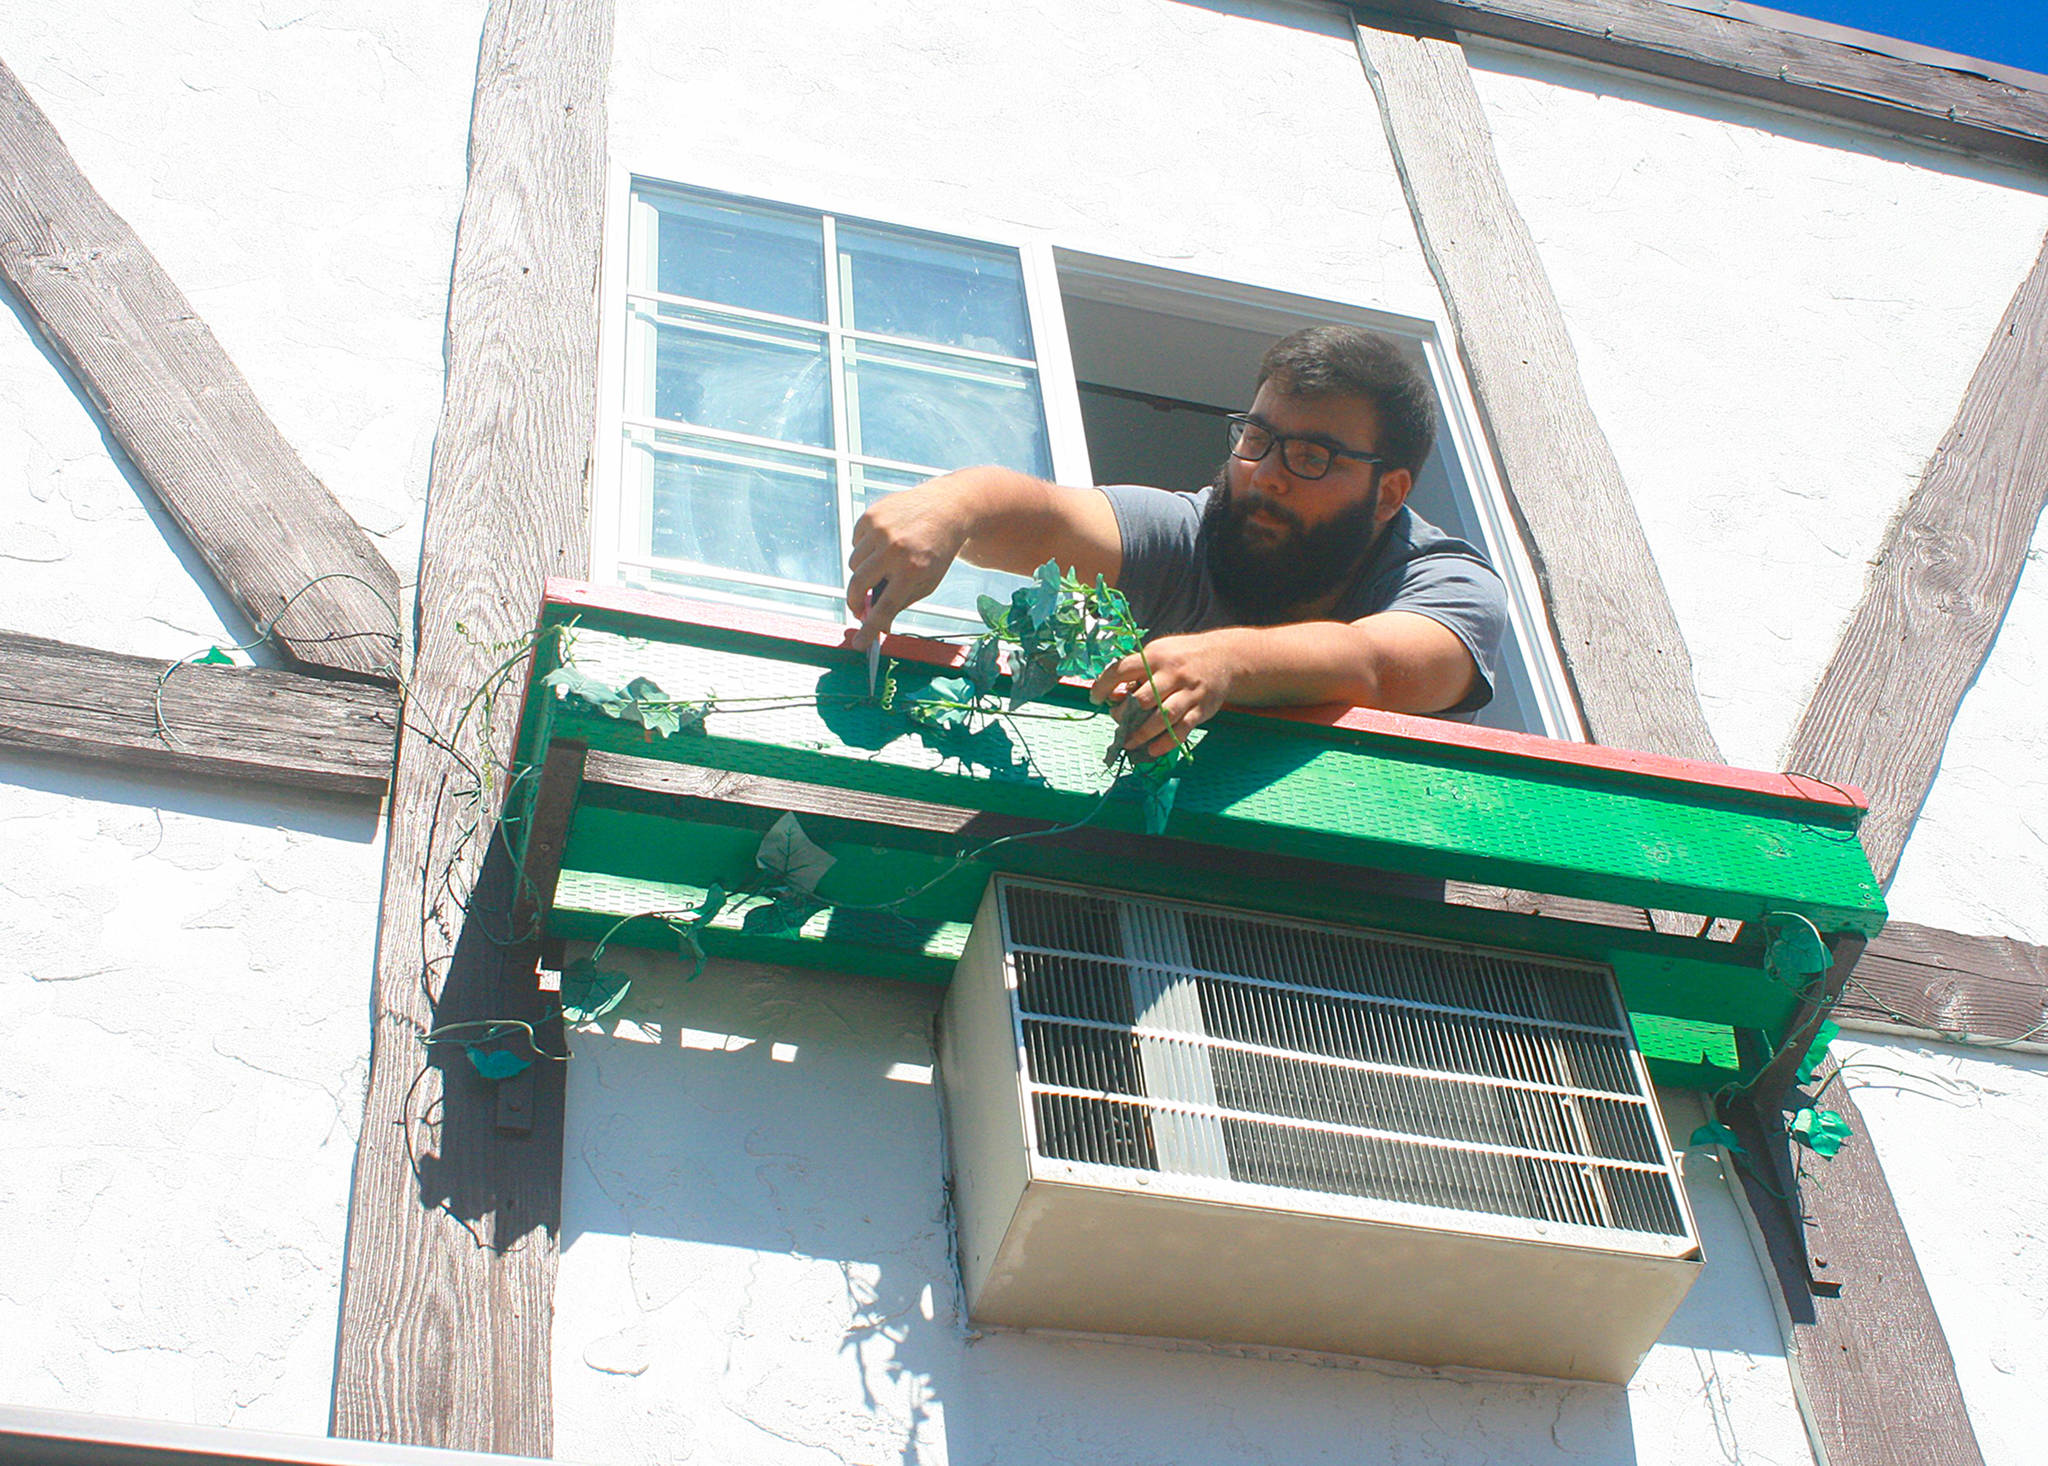 Narno Loza, maintenance worker and housekeeper for Auld Holland Inn, hangs out of a second-story window as he removes worn flower decorations to spruce the place up Monday morning. Photo by Daniel Warn/Whidbey News-Times